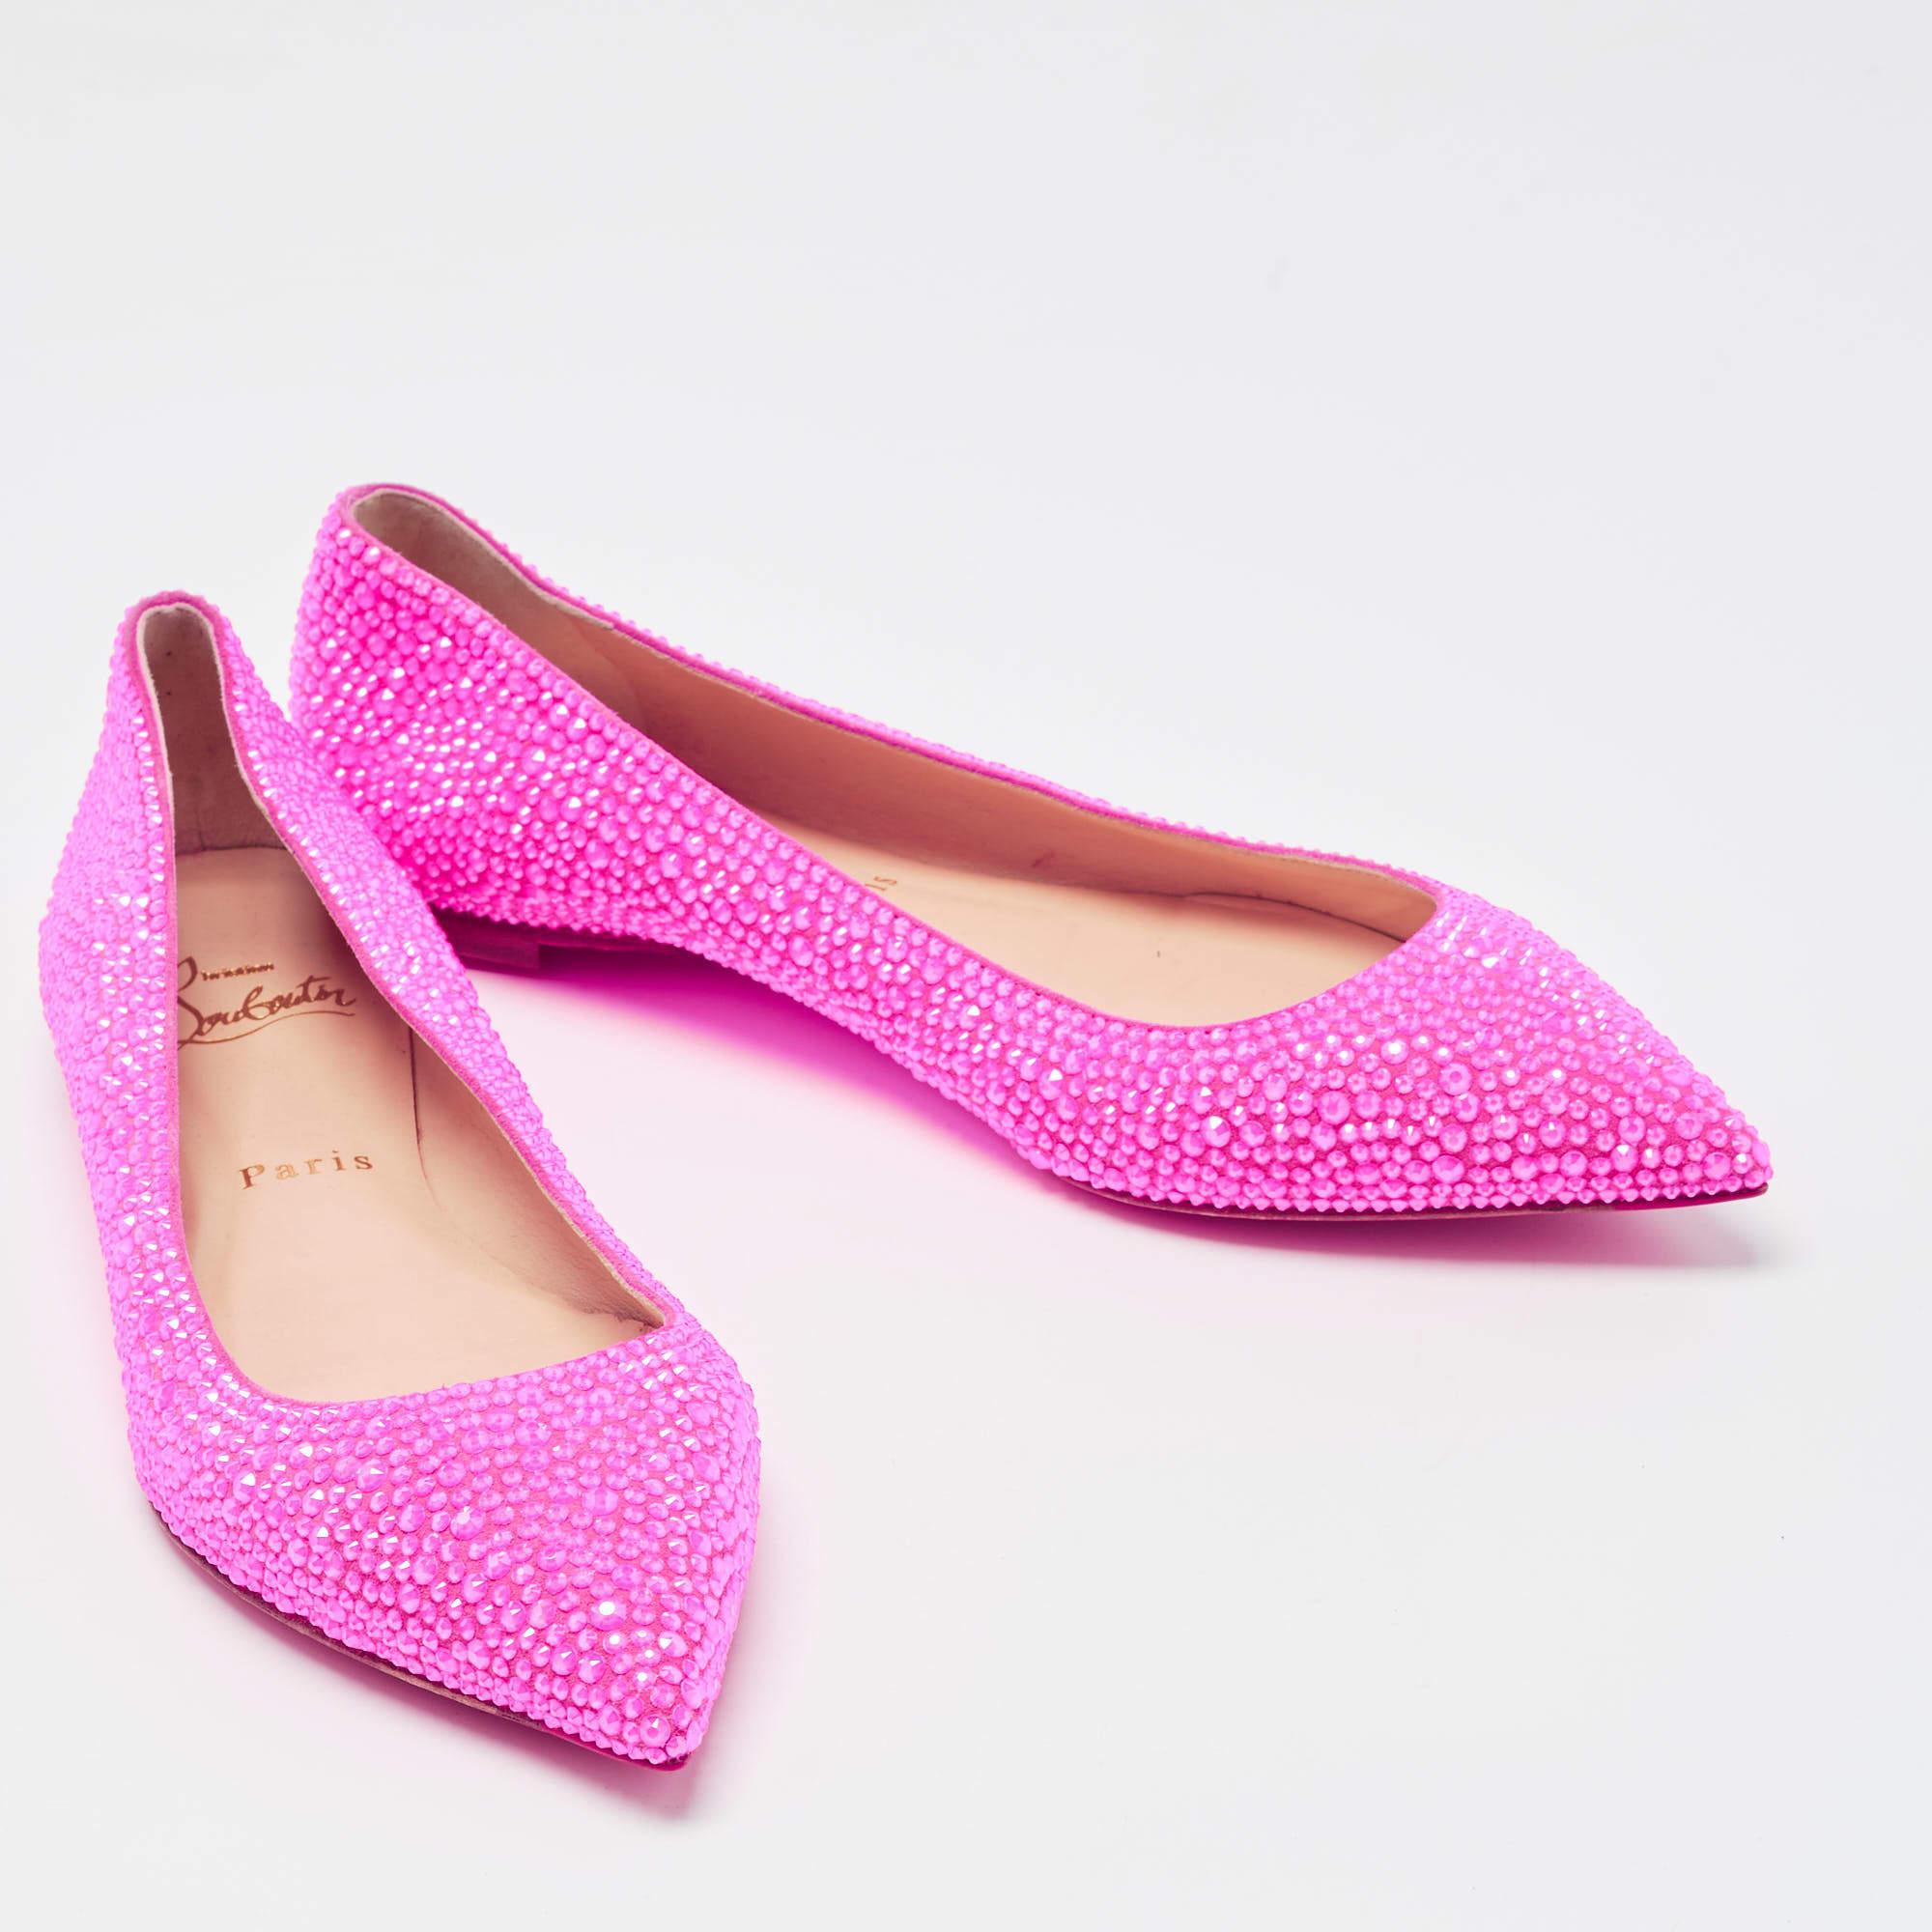 Women's Christian Louboutin Pink Suede Crystal Embellished Ballet Flats Size 37